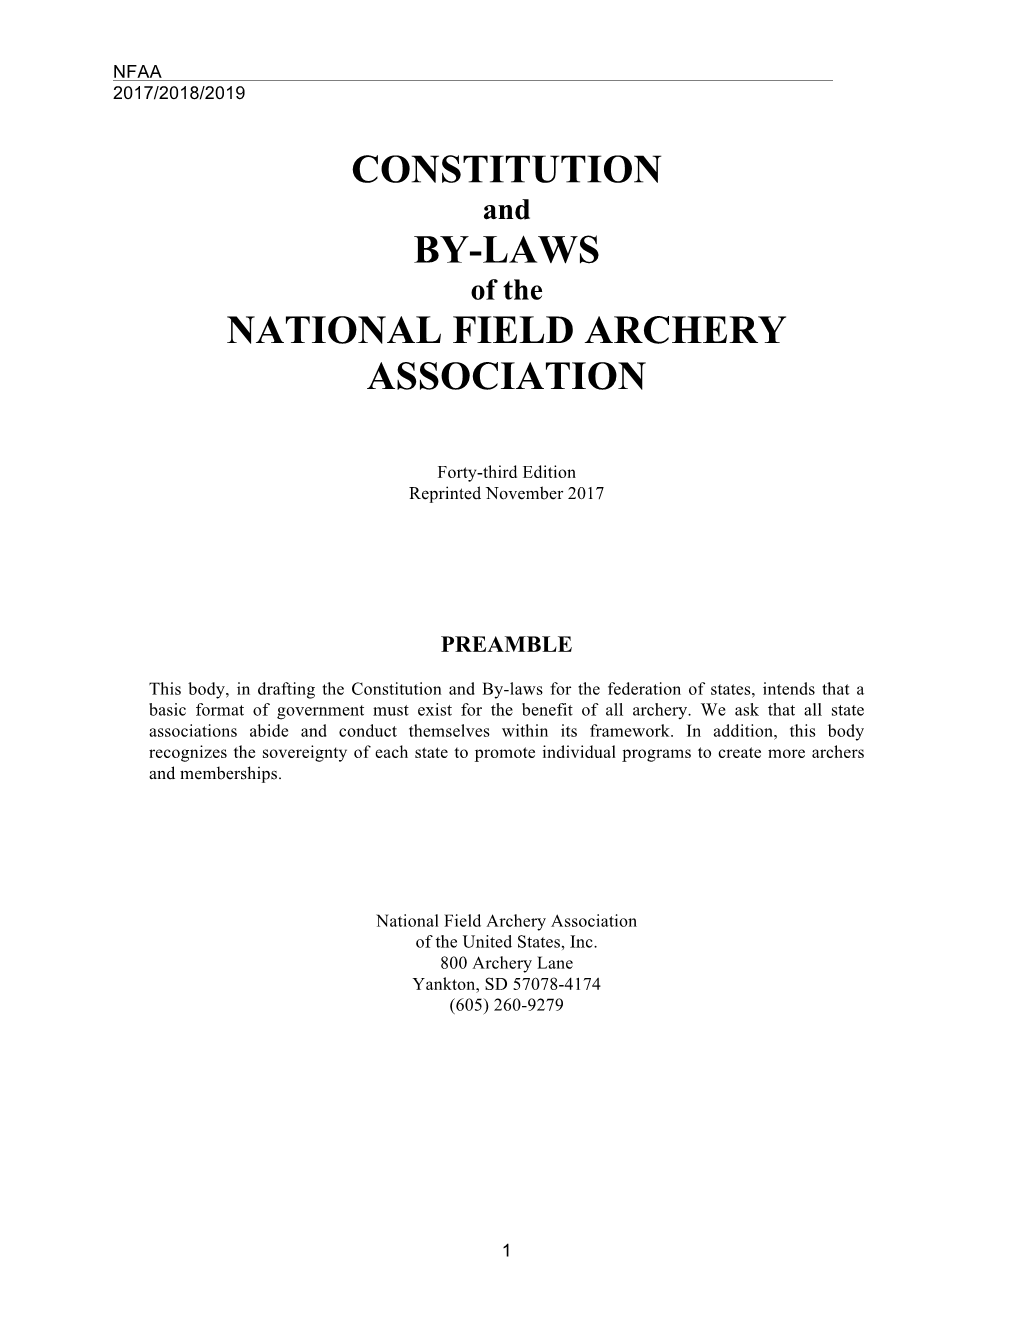 Constitution By-Laws National Field Archery Association